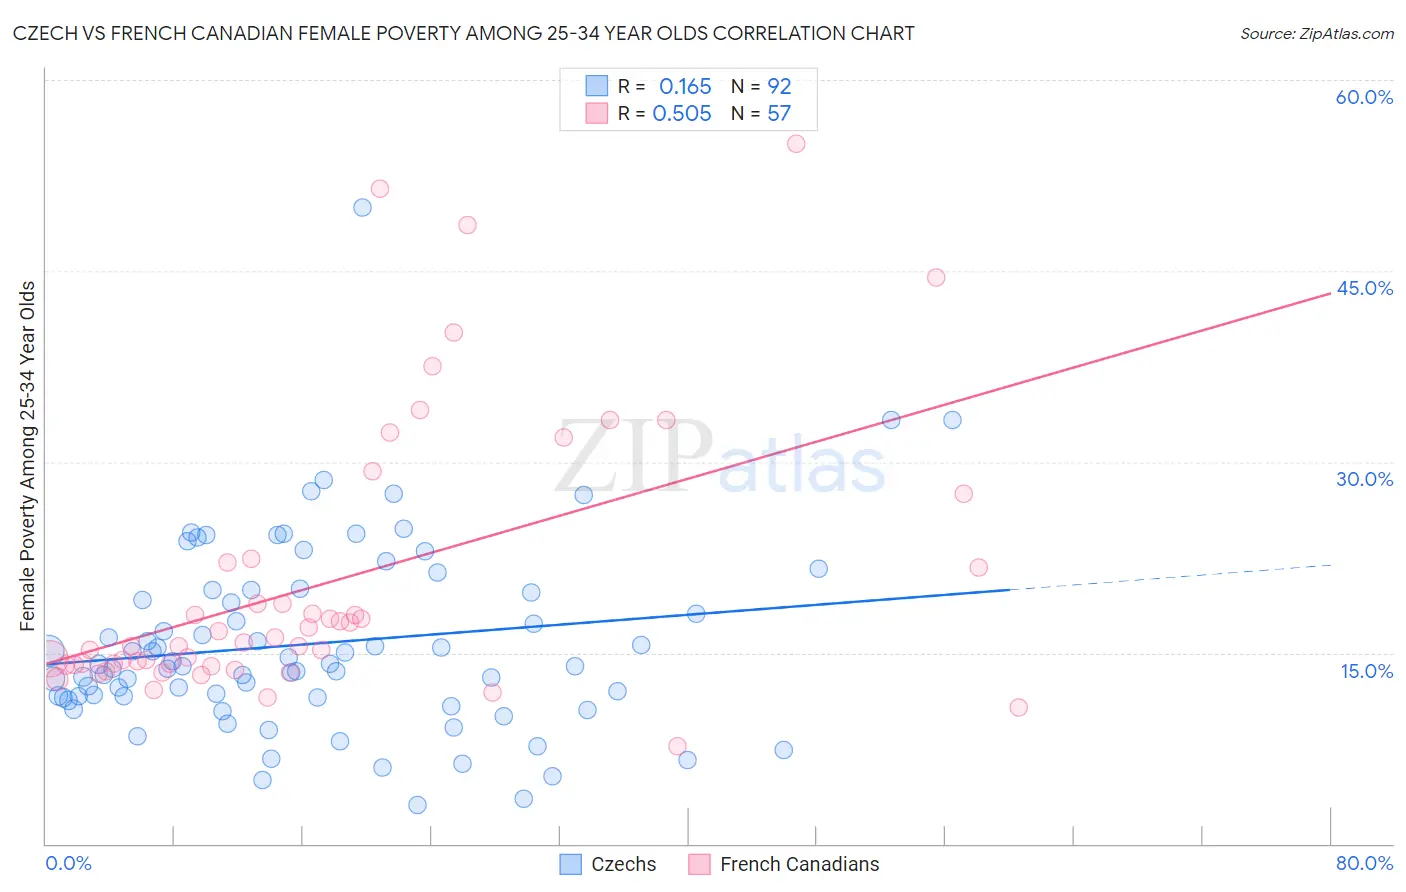 Czech vs French Canadian Female Poverty Among 25-34 Year Olds